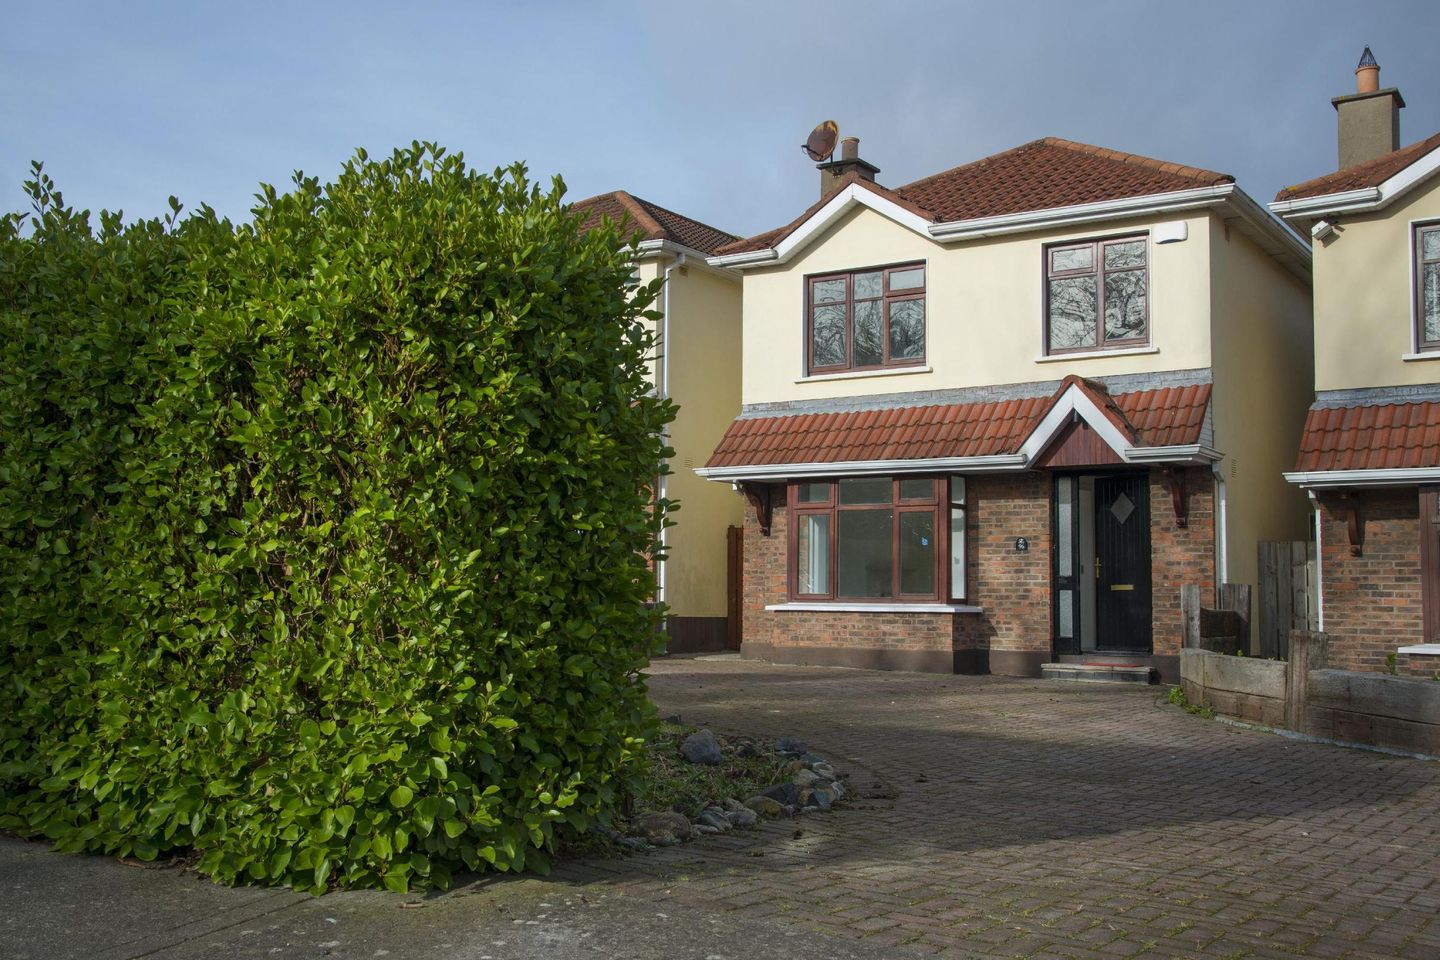 96 Giltspur Wood, Bray, Co. Wicklow, A98P702